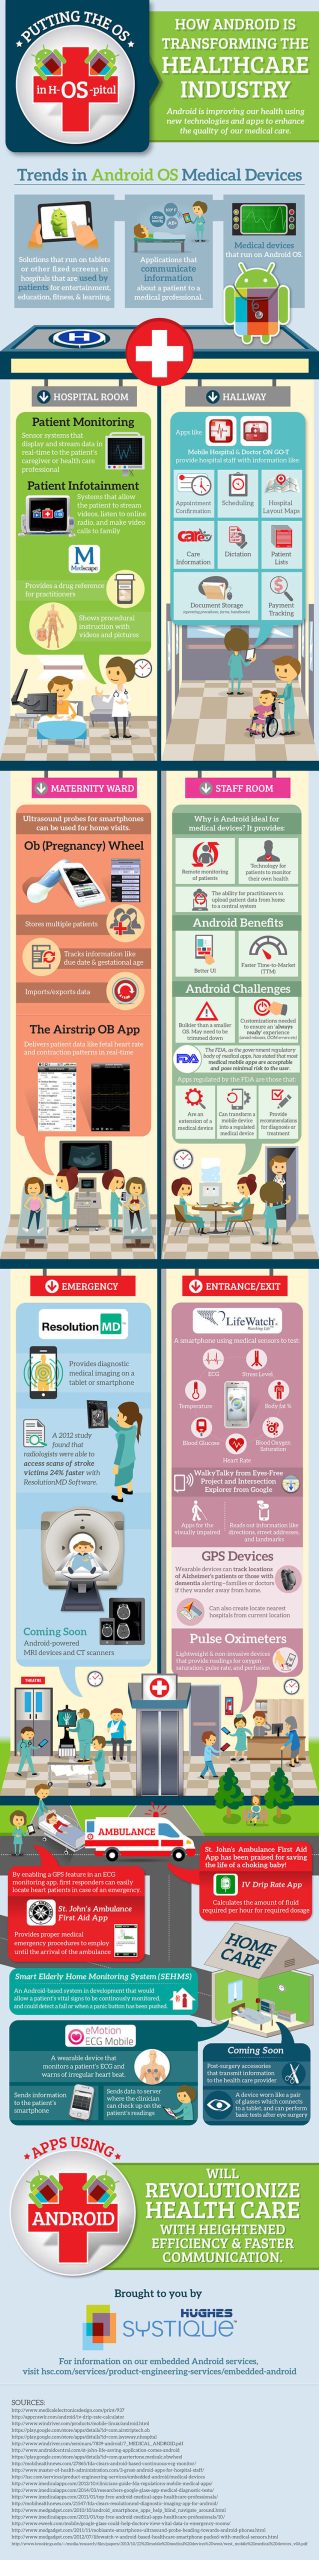 embedded healthcare technology- infographic